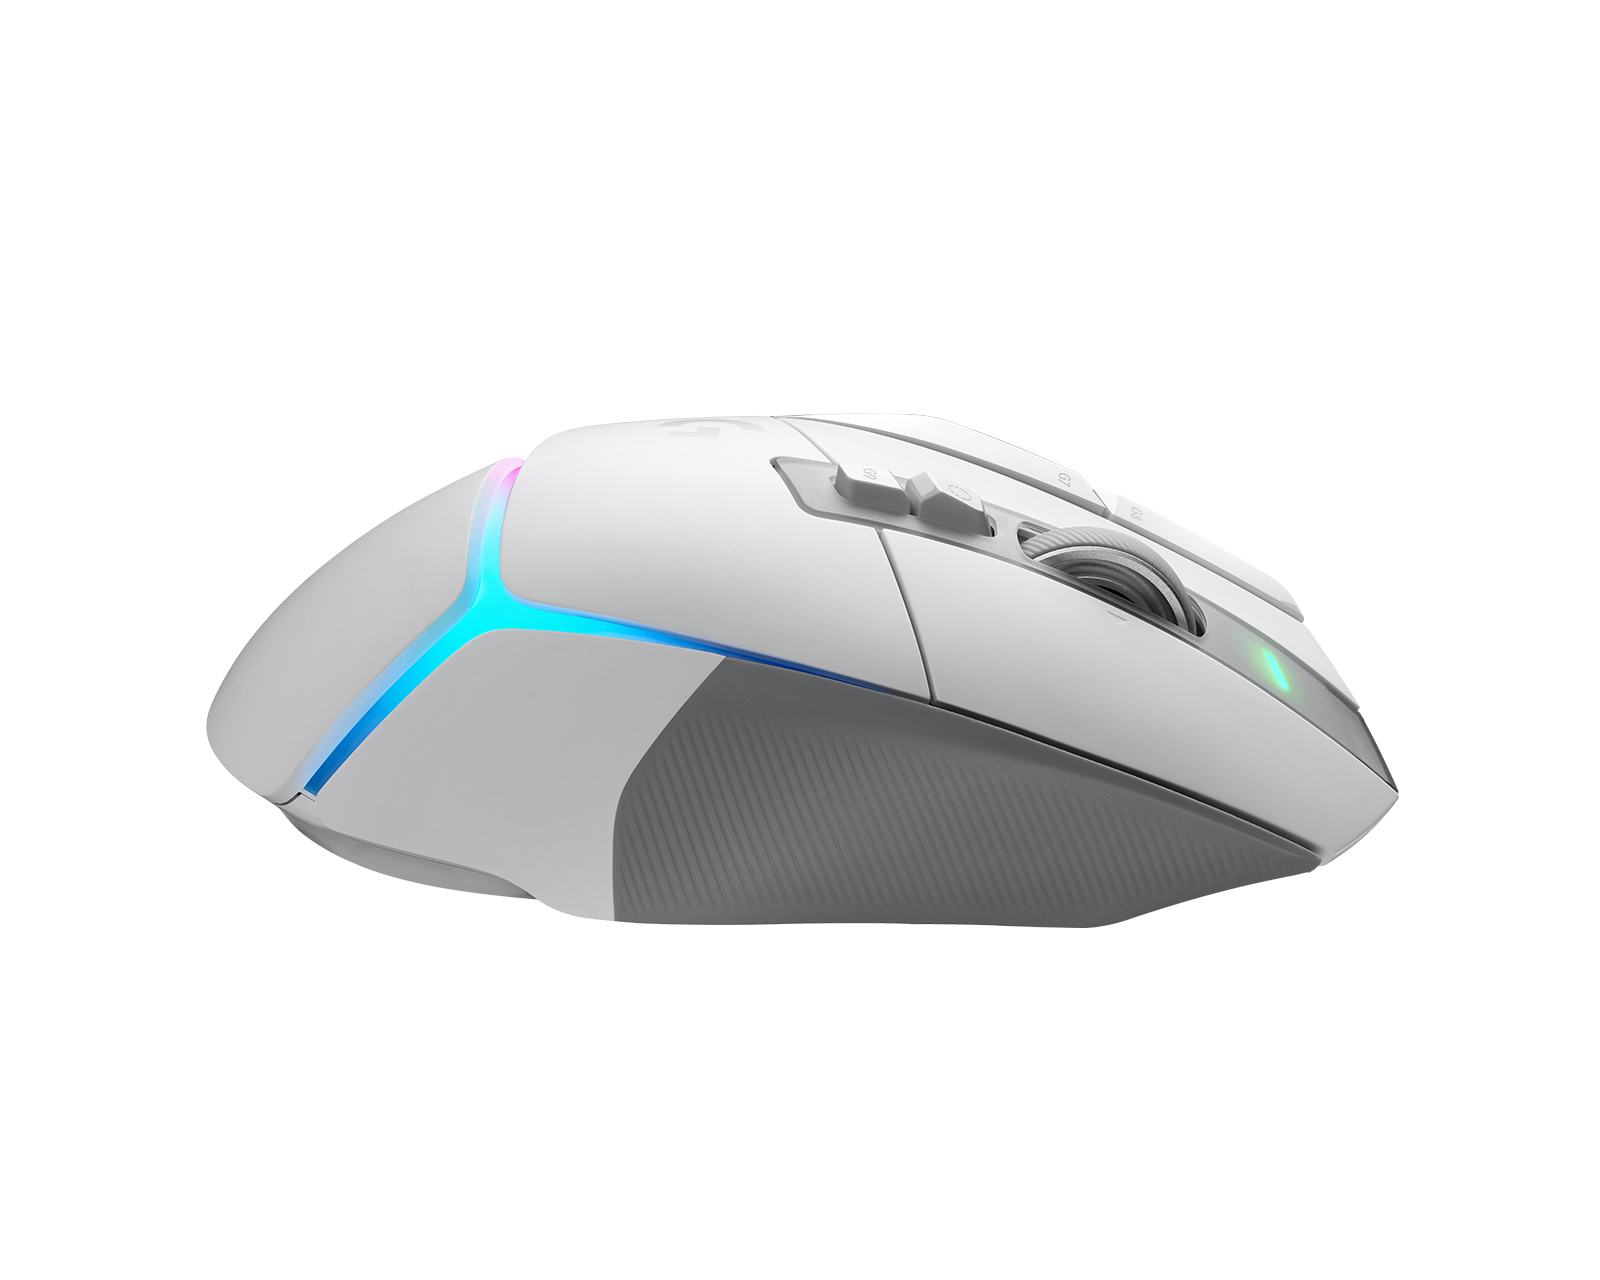 G502 X Plus Wireless RGB Gaming Mouse